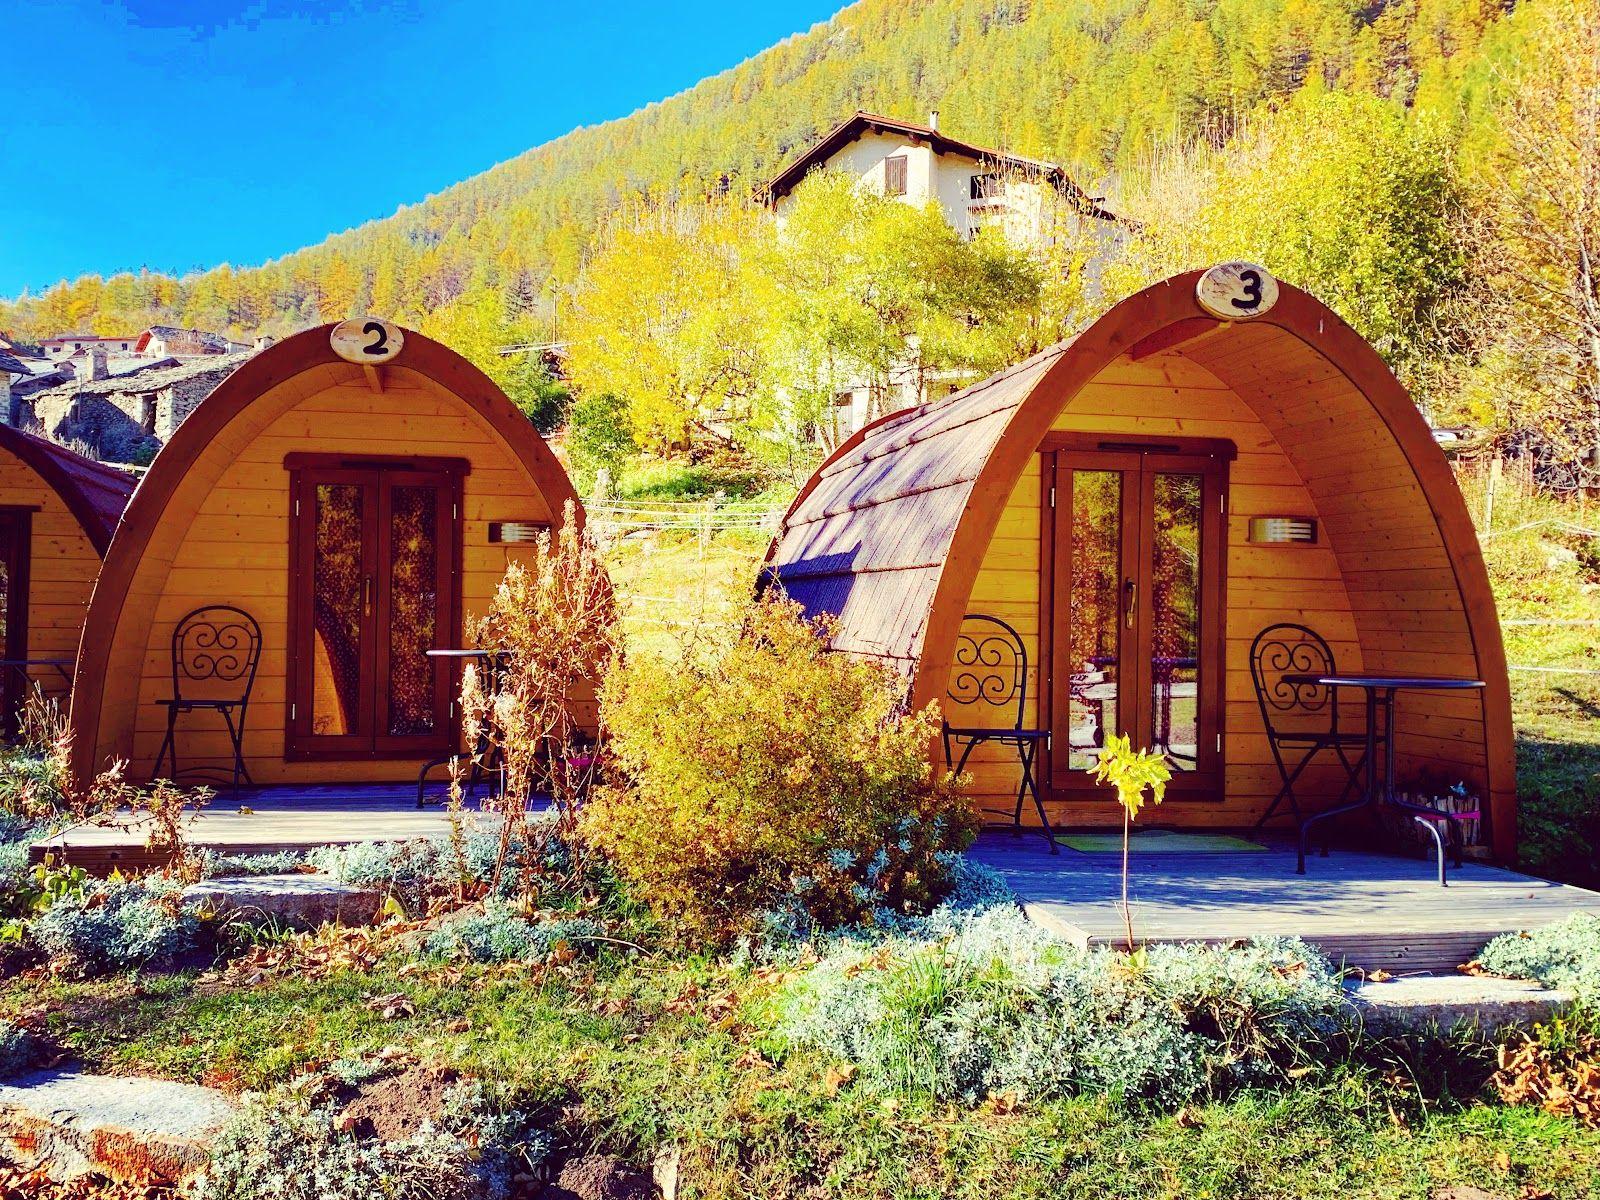 Camping Casa Bianca, Ceresole Reale, Italy